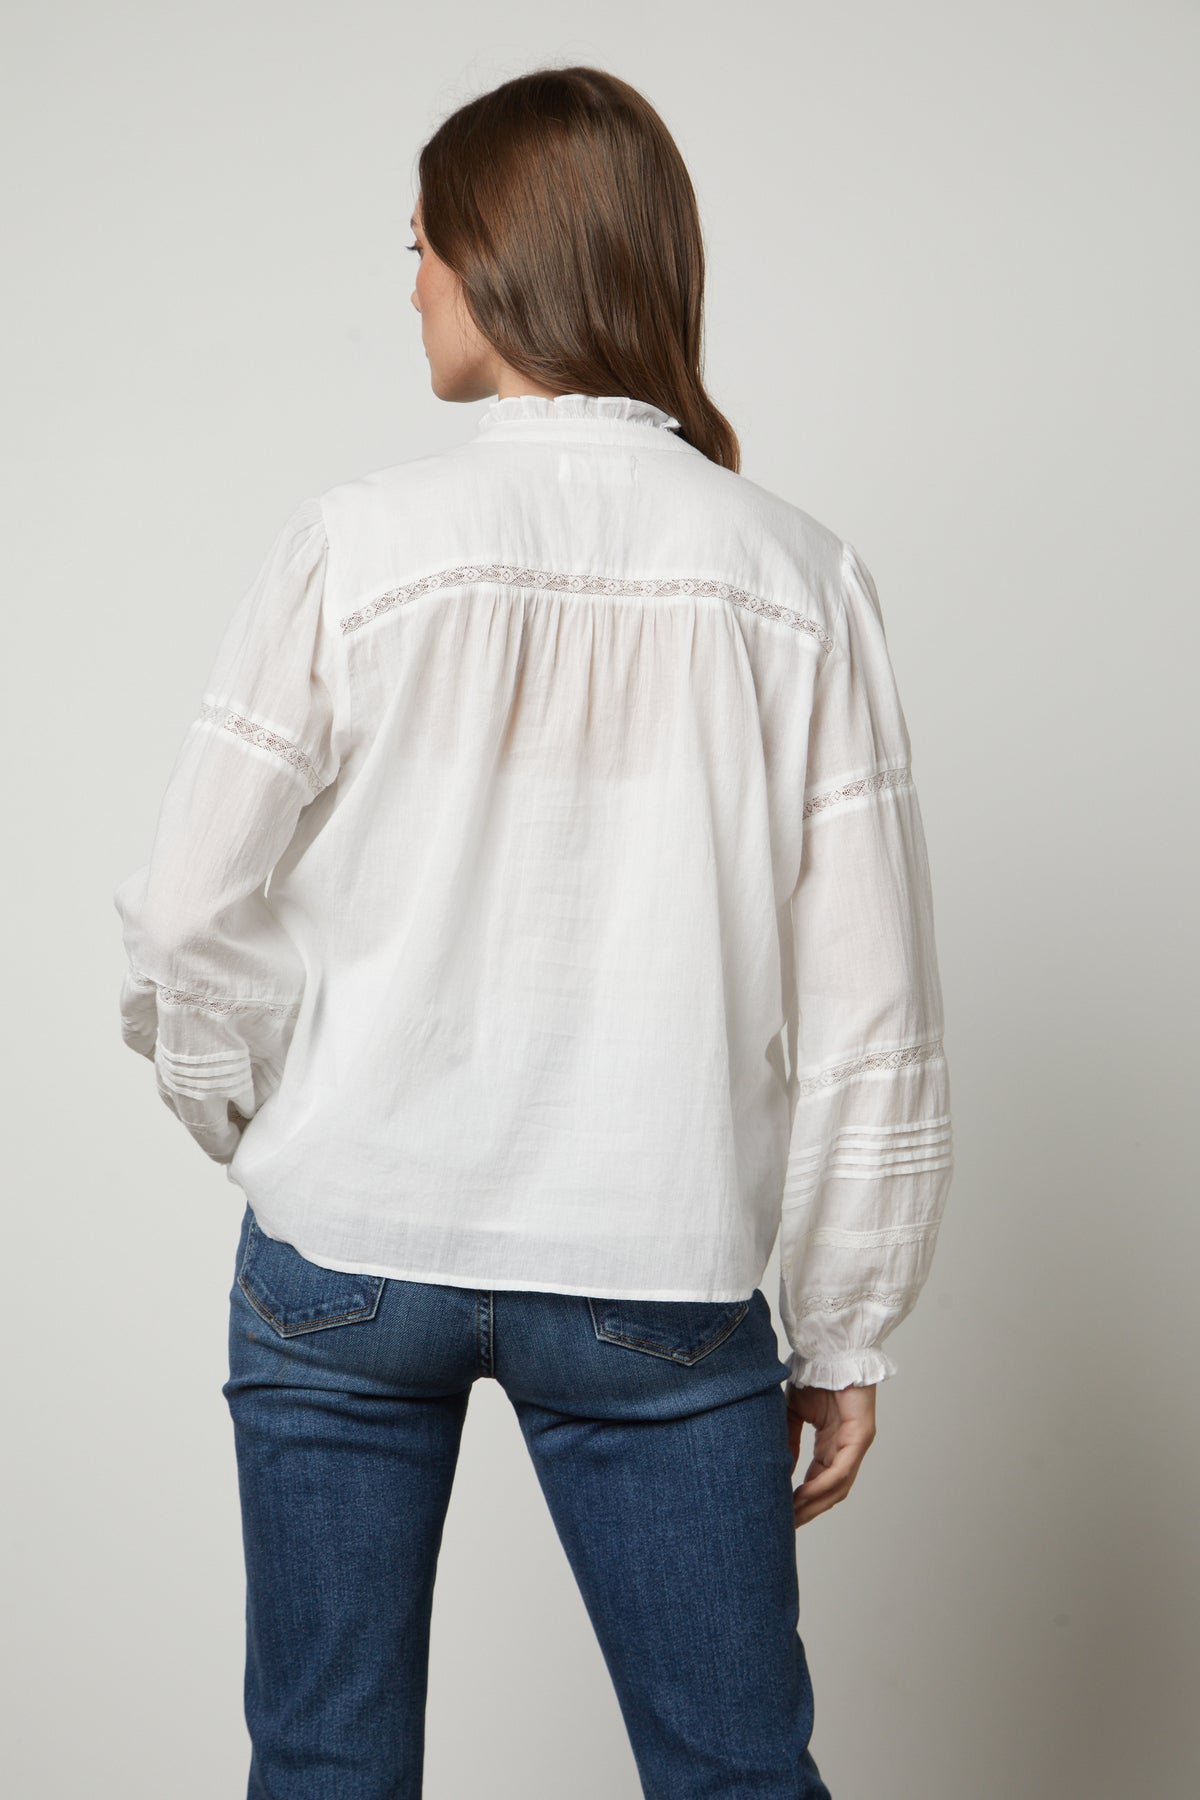 The back view of a woman wearing a Velvet by Graham & Spencer ROMY LACE BOHO TOP and jeans.-26834995544257